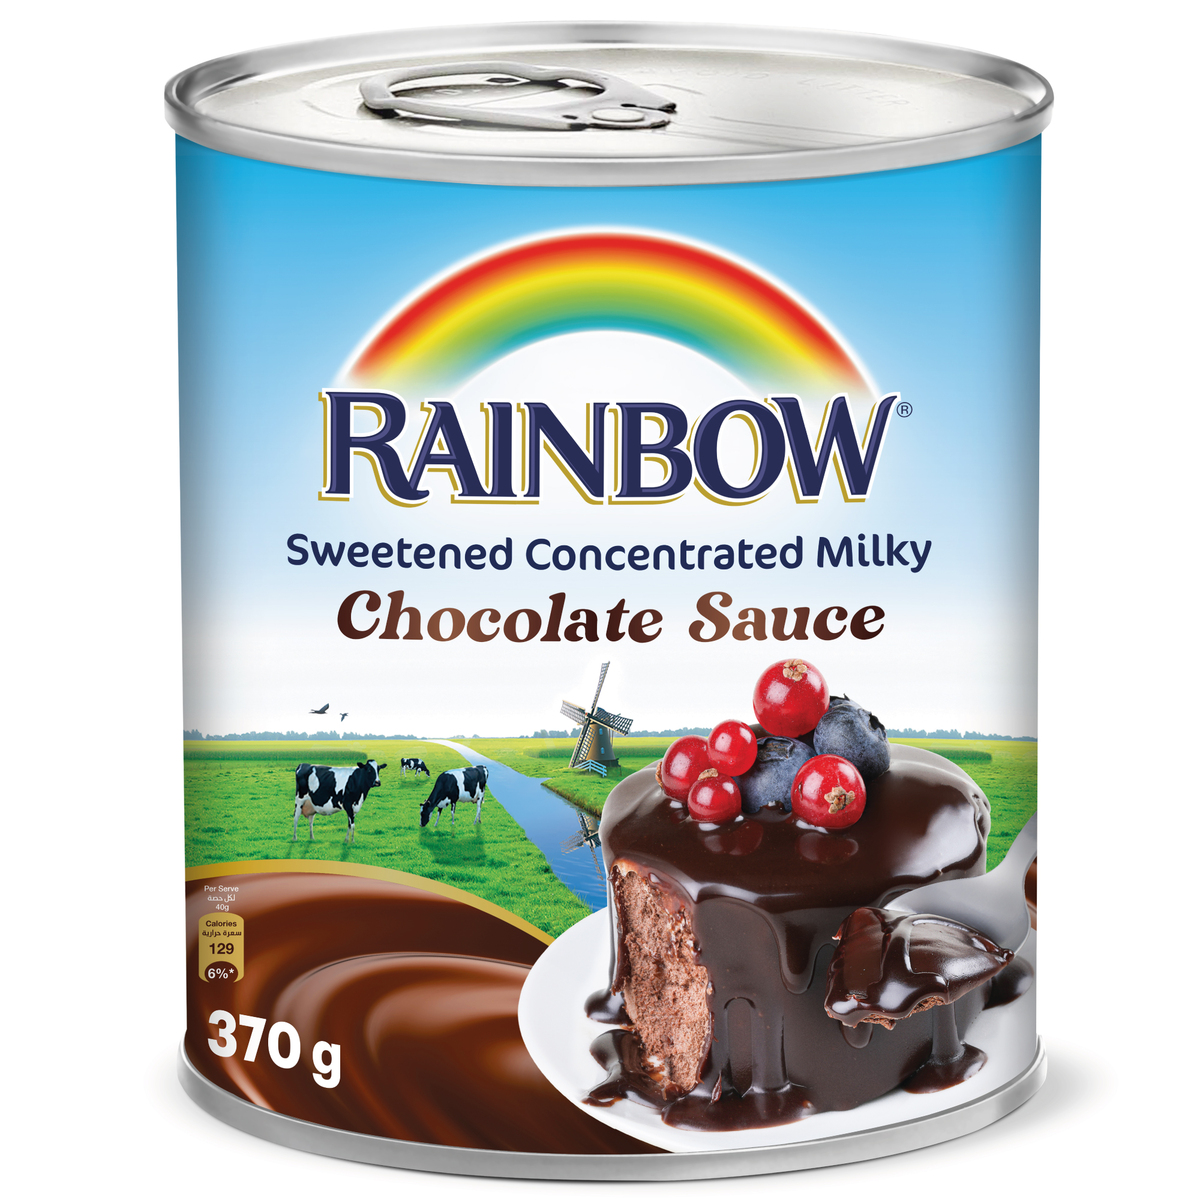 Rainbow Sweetened Concentrated Milky Chocolate Sauce 370 g